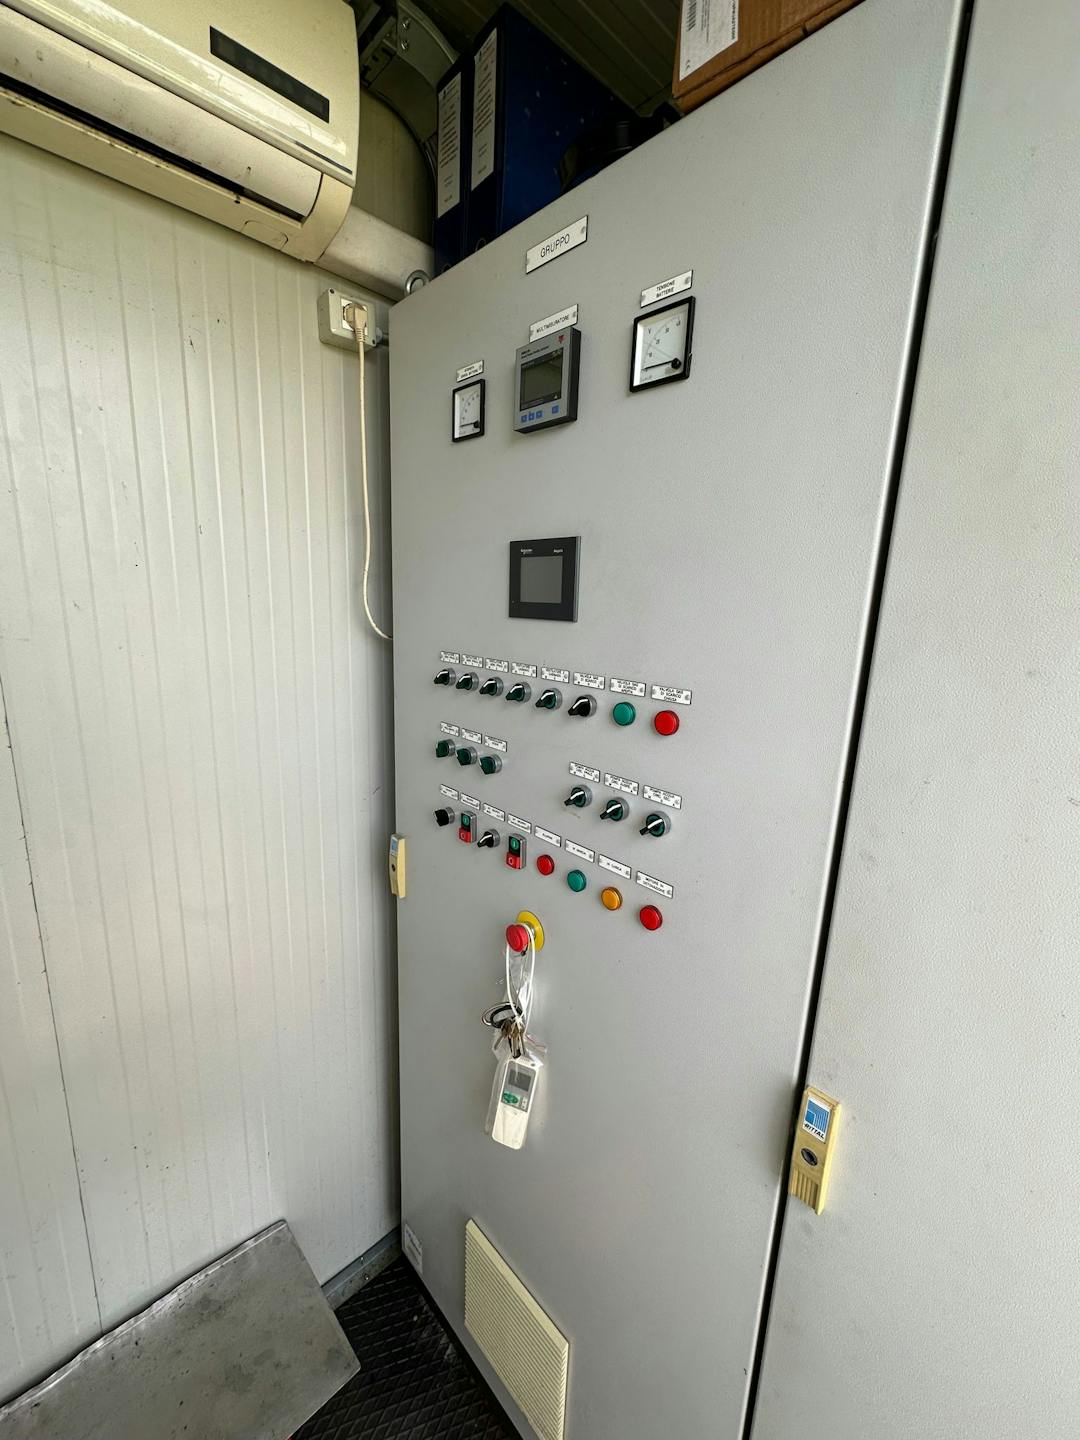 nullPhoto of Guascor FGLD180 Natural Gas Generator Set with outside of control panel door - used gas generator for sale uk